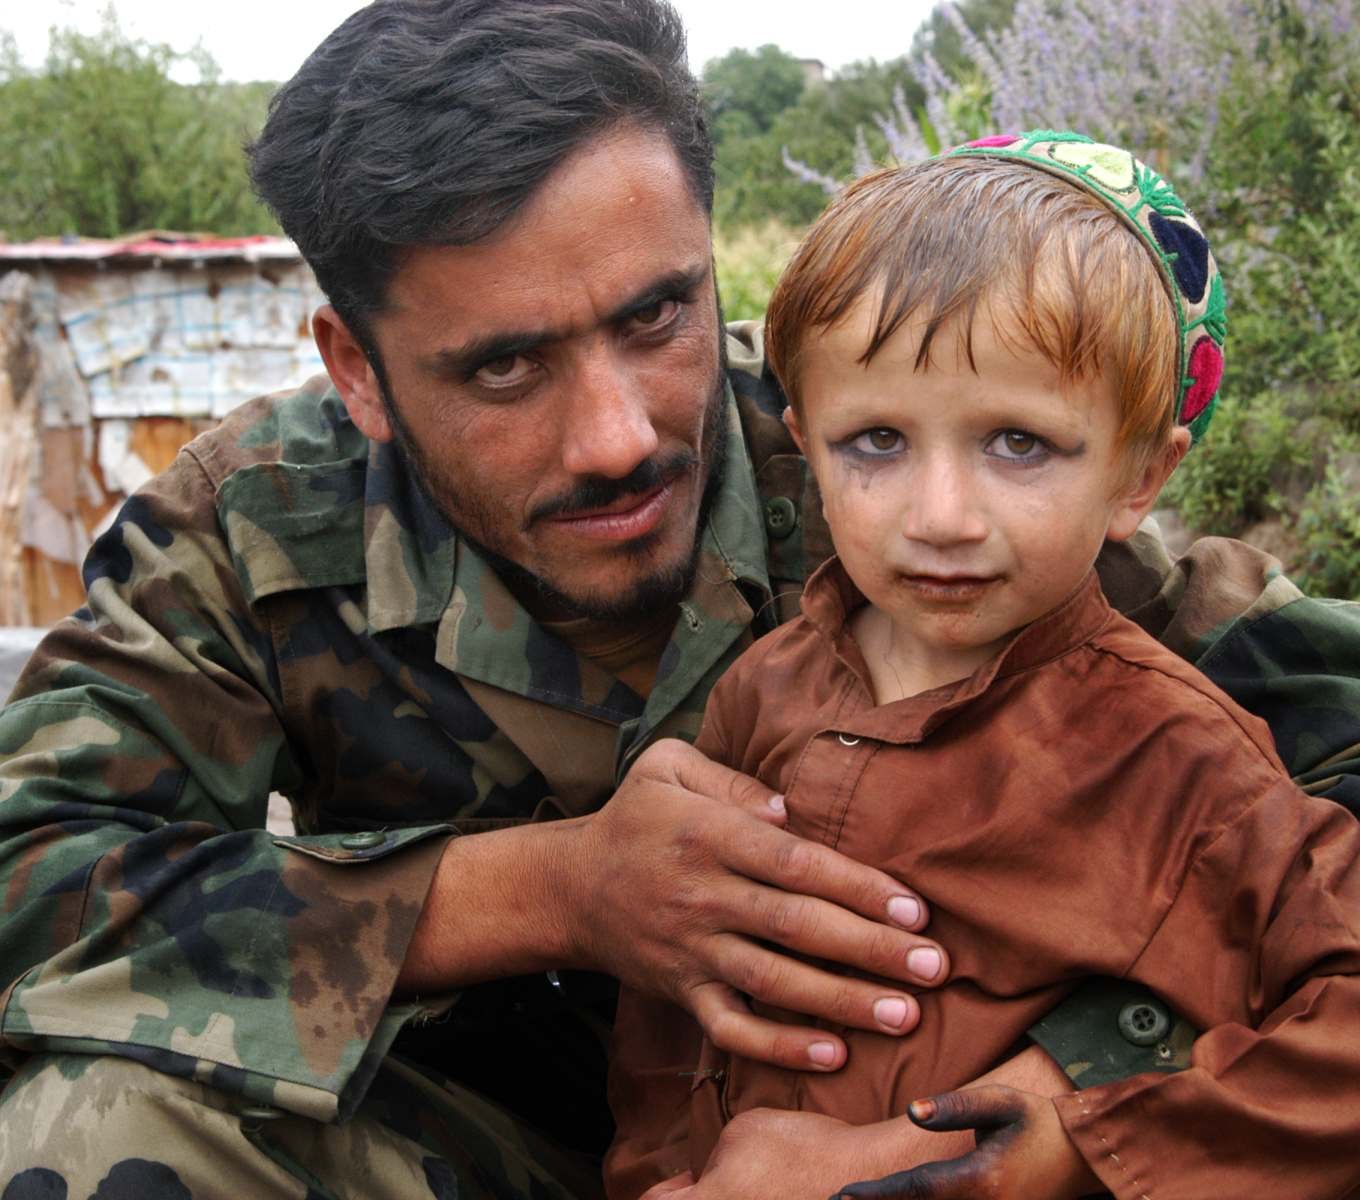 Small Boy Sex - Afghan Boys Abused on US Military Bases â€“ Soldiers Told To ...